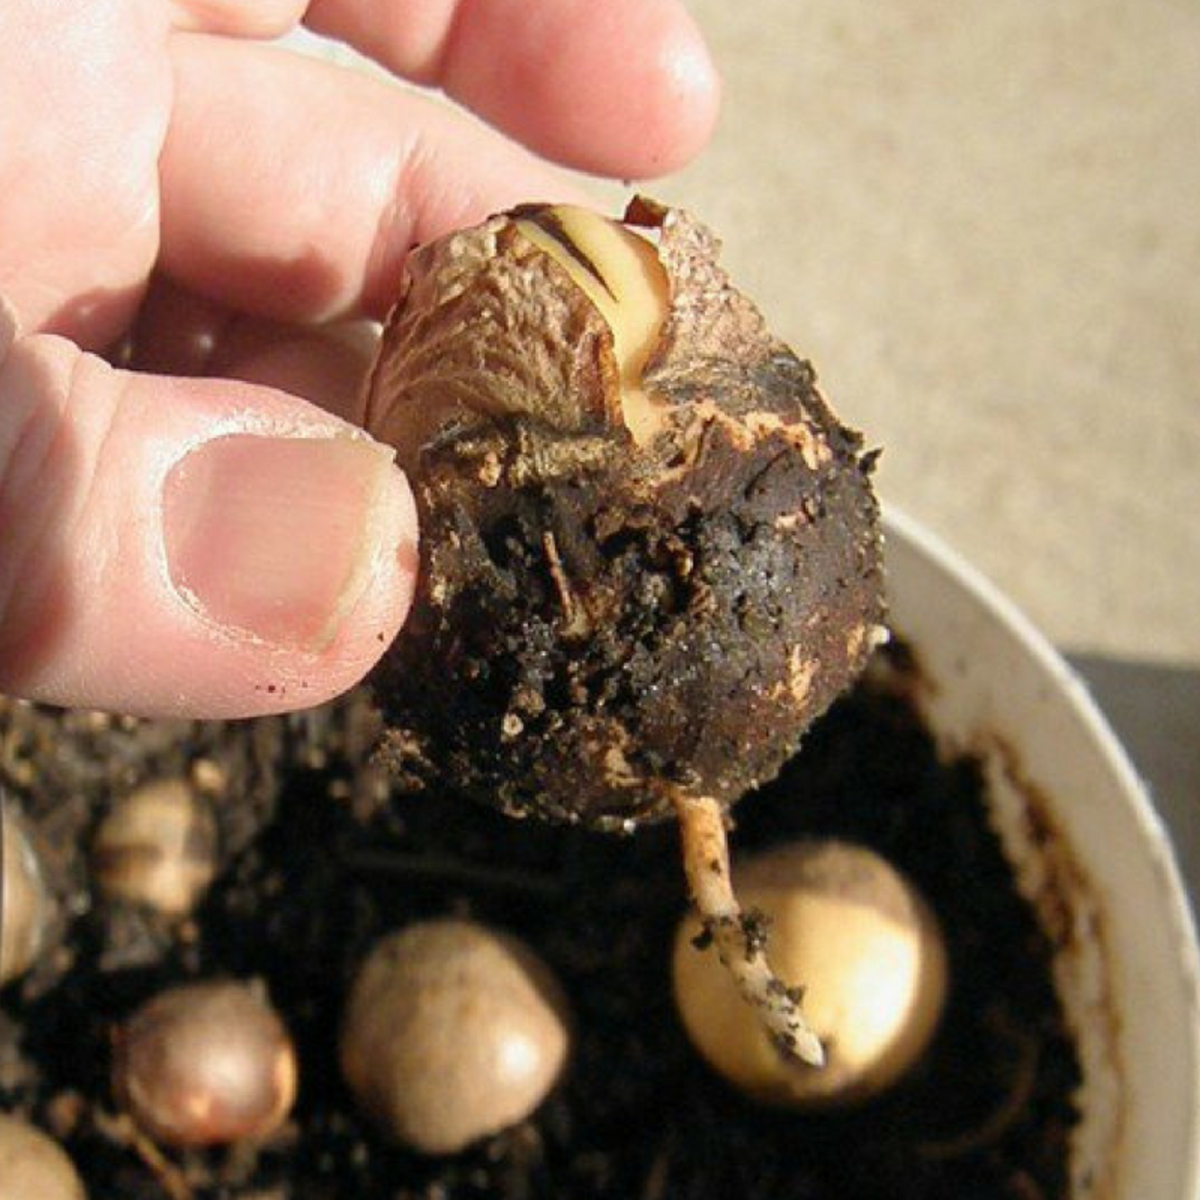 The Easiest Way To Plant And Grow An Avocado Seed In Soil Dengarden Home And Garden